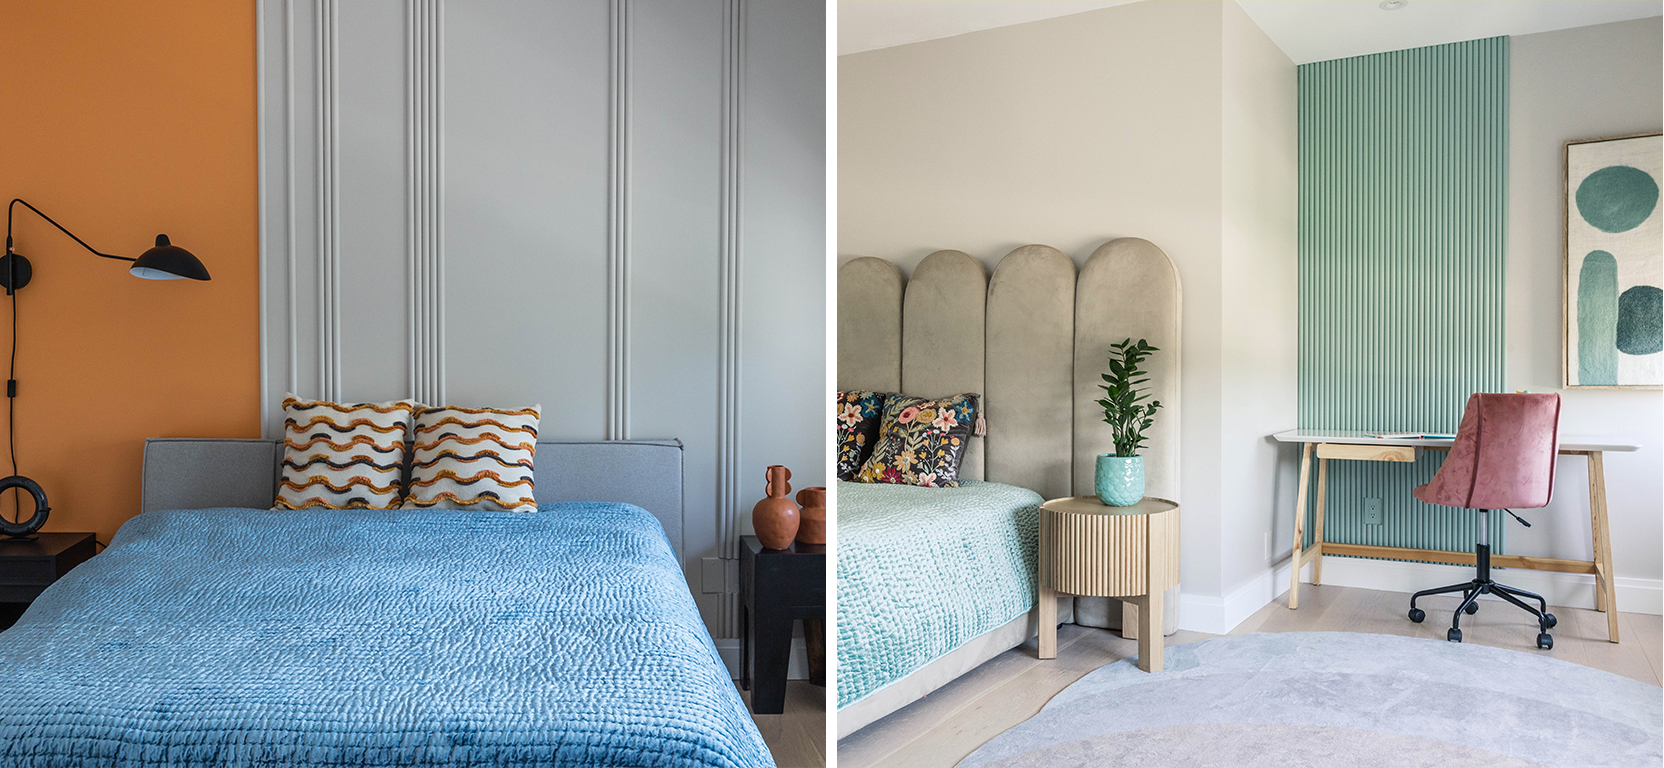 Two different bedroom scenes using light gray as a main wall color with accent walls, both with minimalist modern designs and decor.